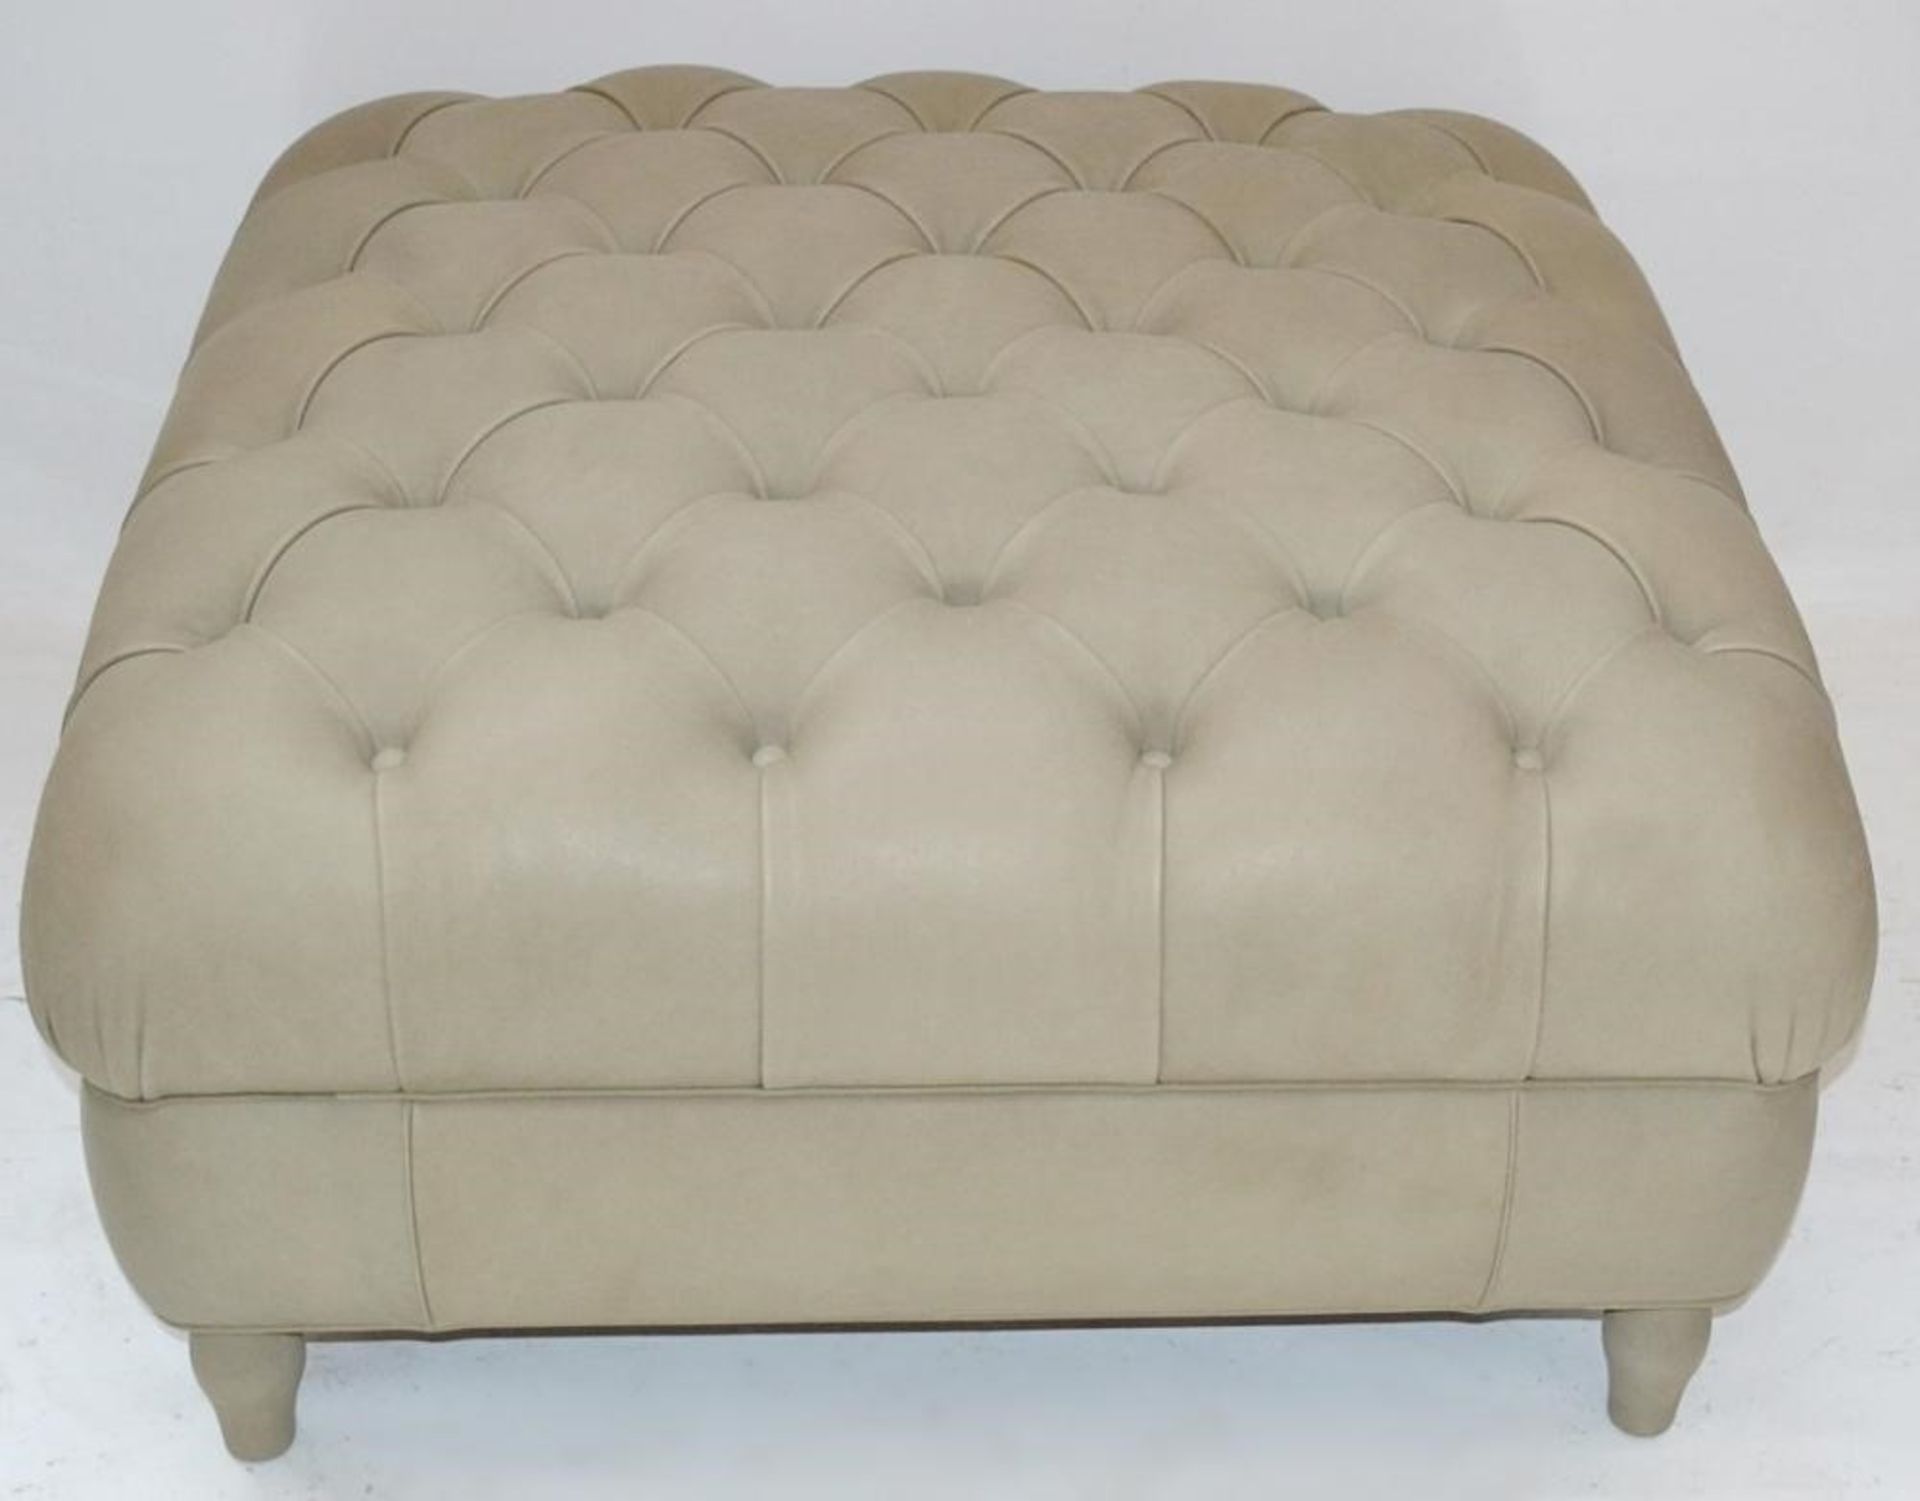 1 x POLTRONA FRAU "Chester" Square Buttoned Pouf Richly Upholstered In Pelle Frau® Century Leather ( - Image 2 of 9